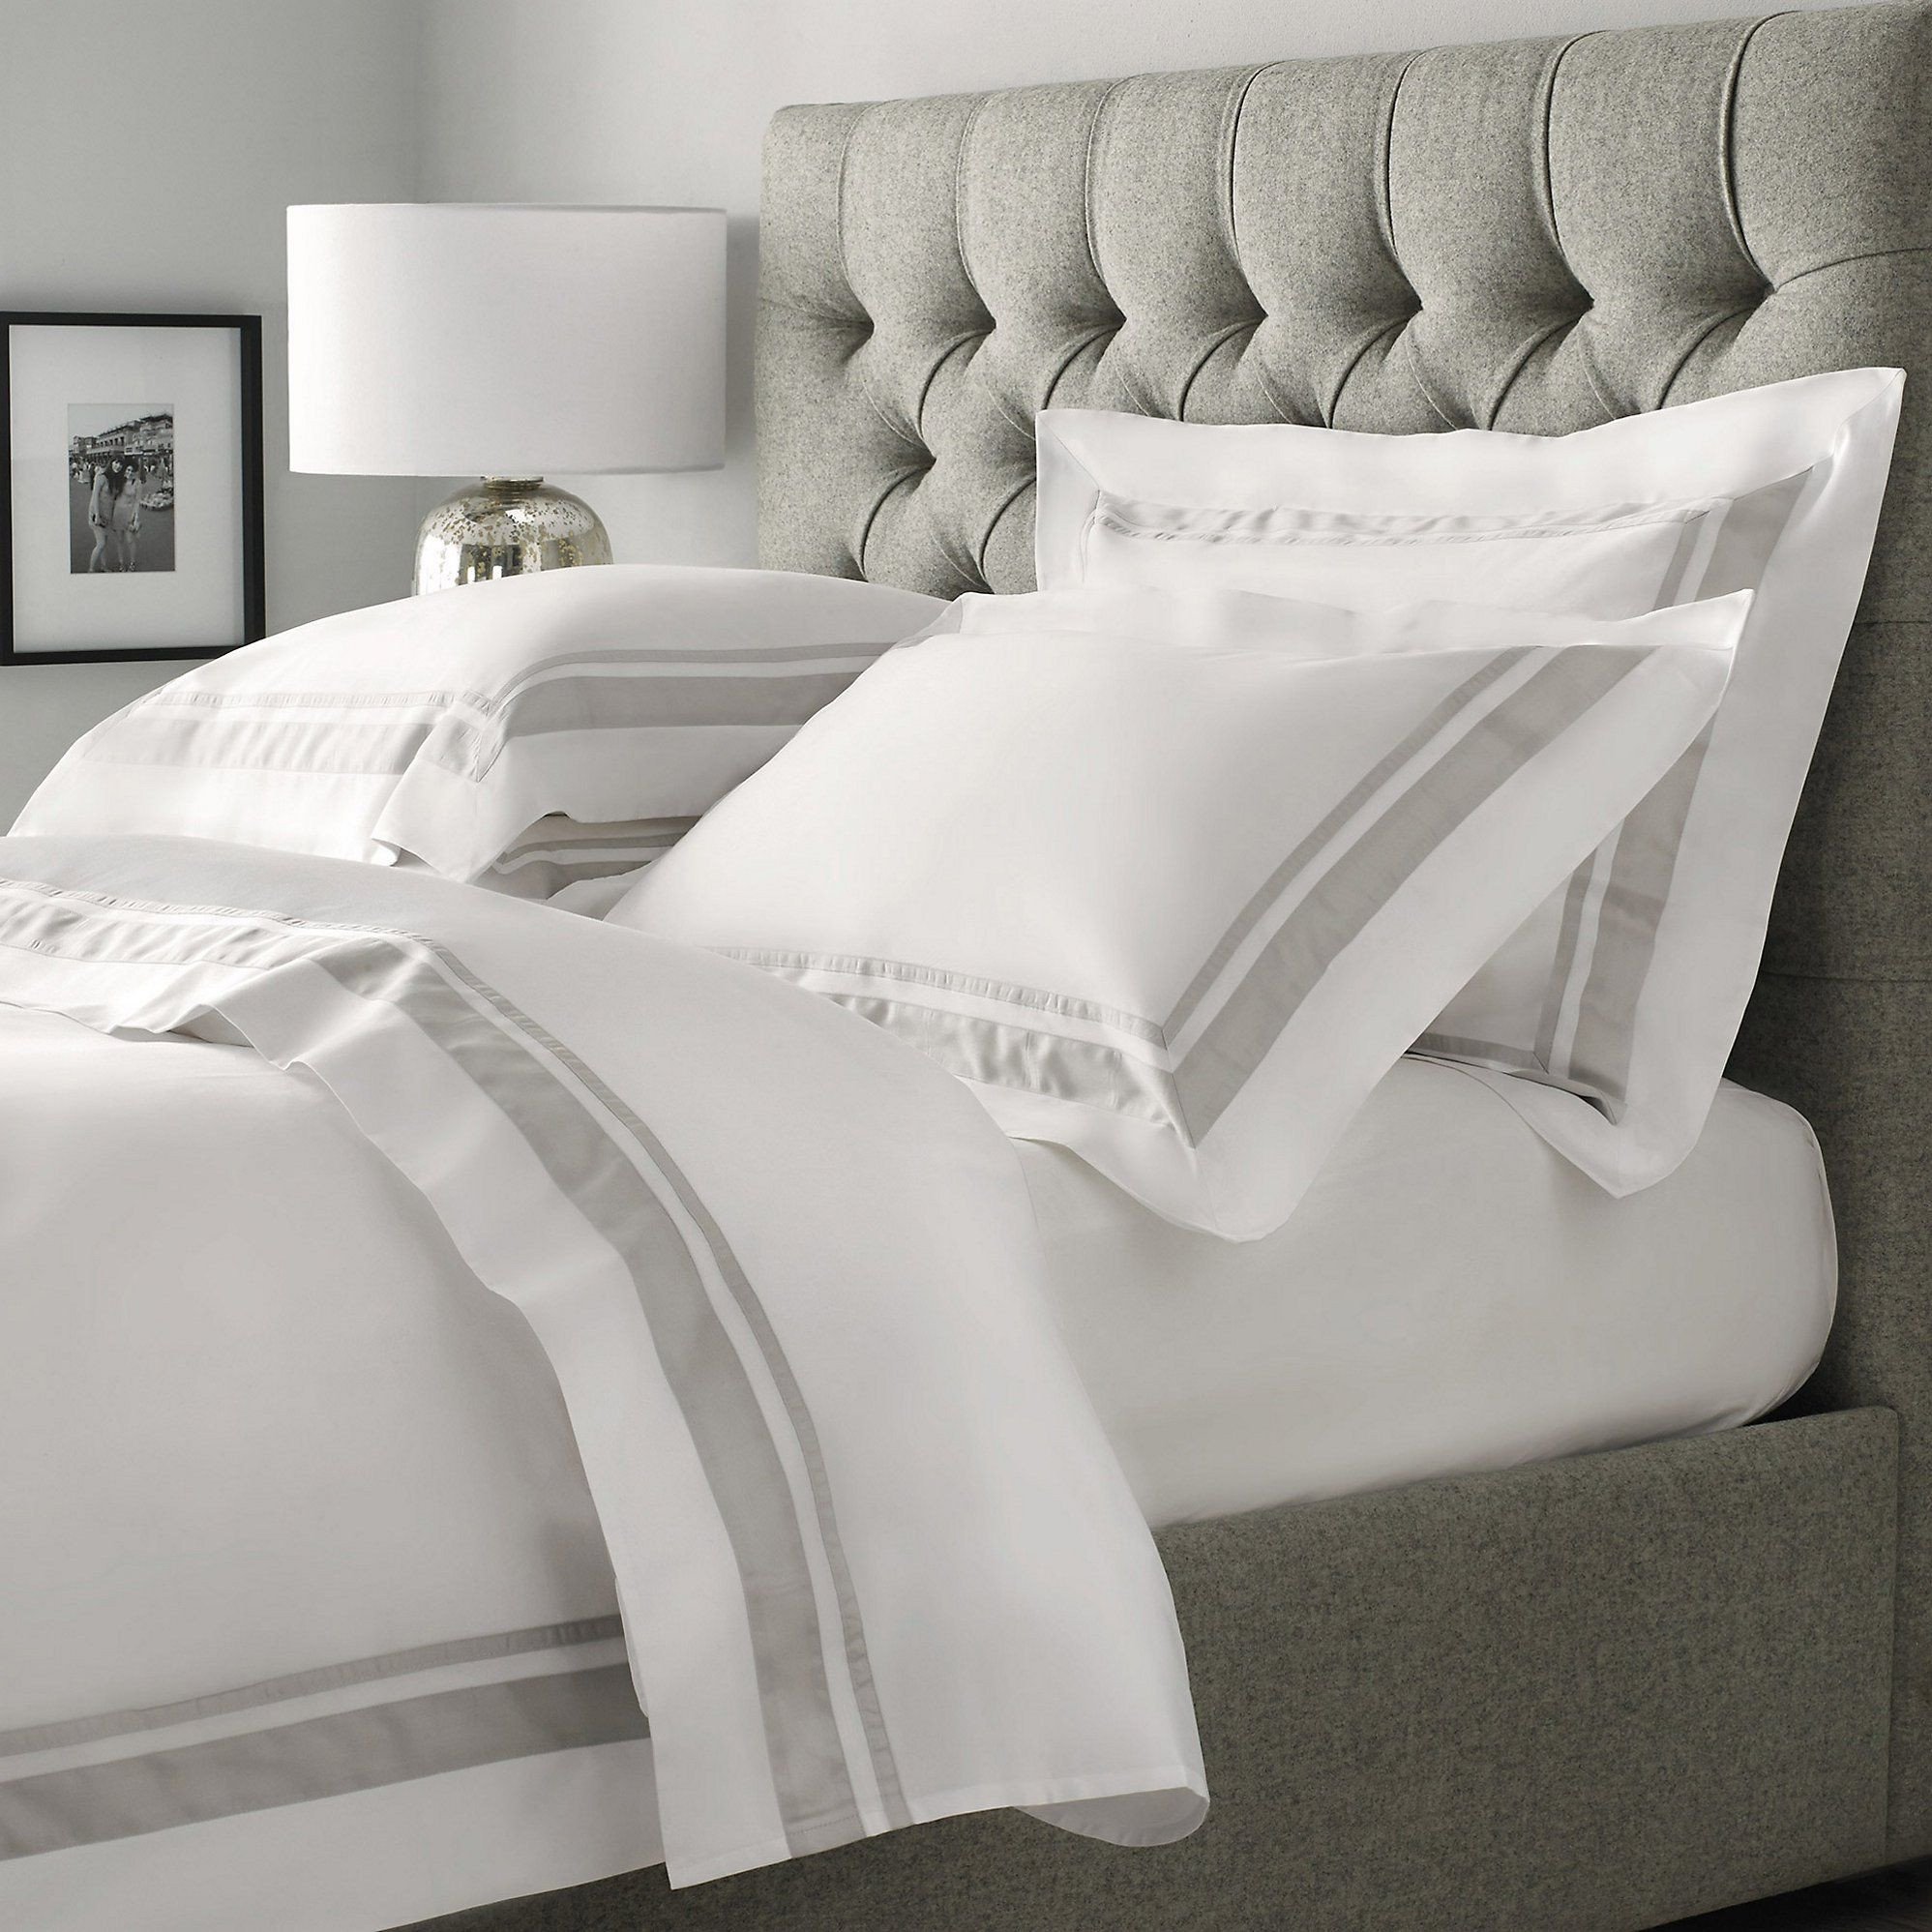 White and Silver Bedroom Set New Brompton Bed Linen Collection Bedroom